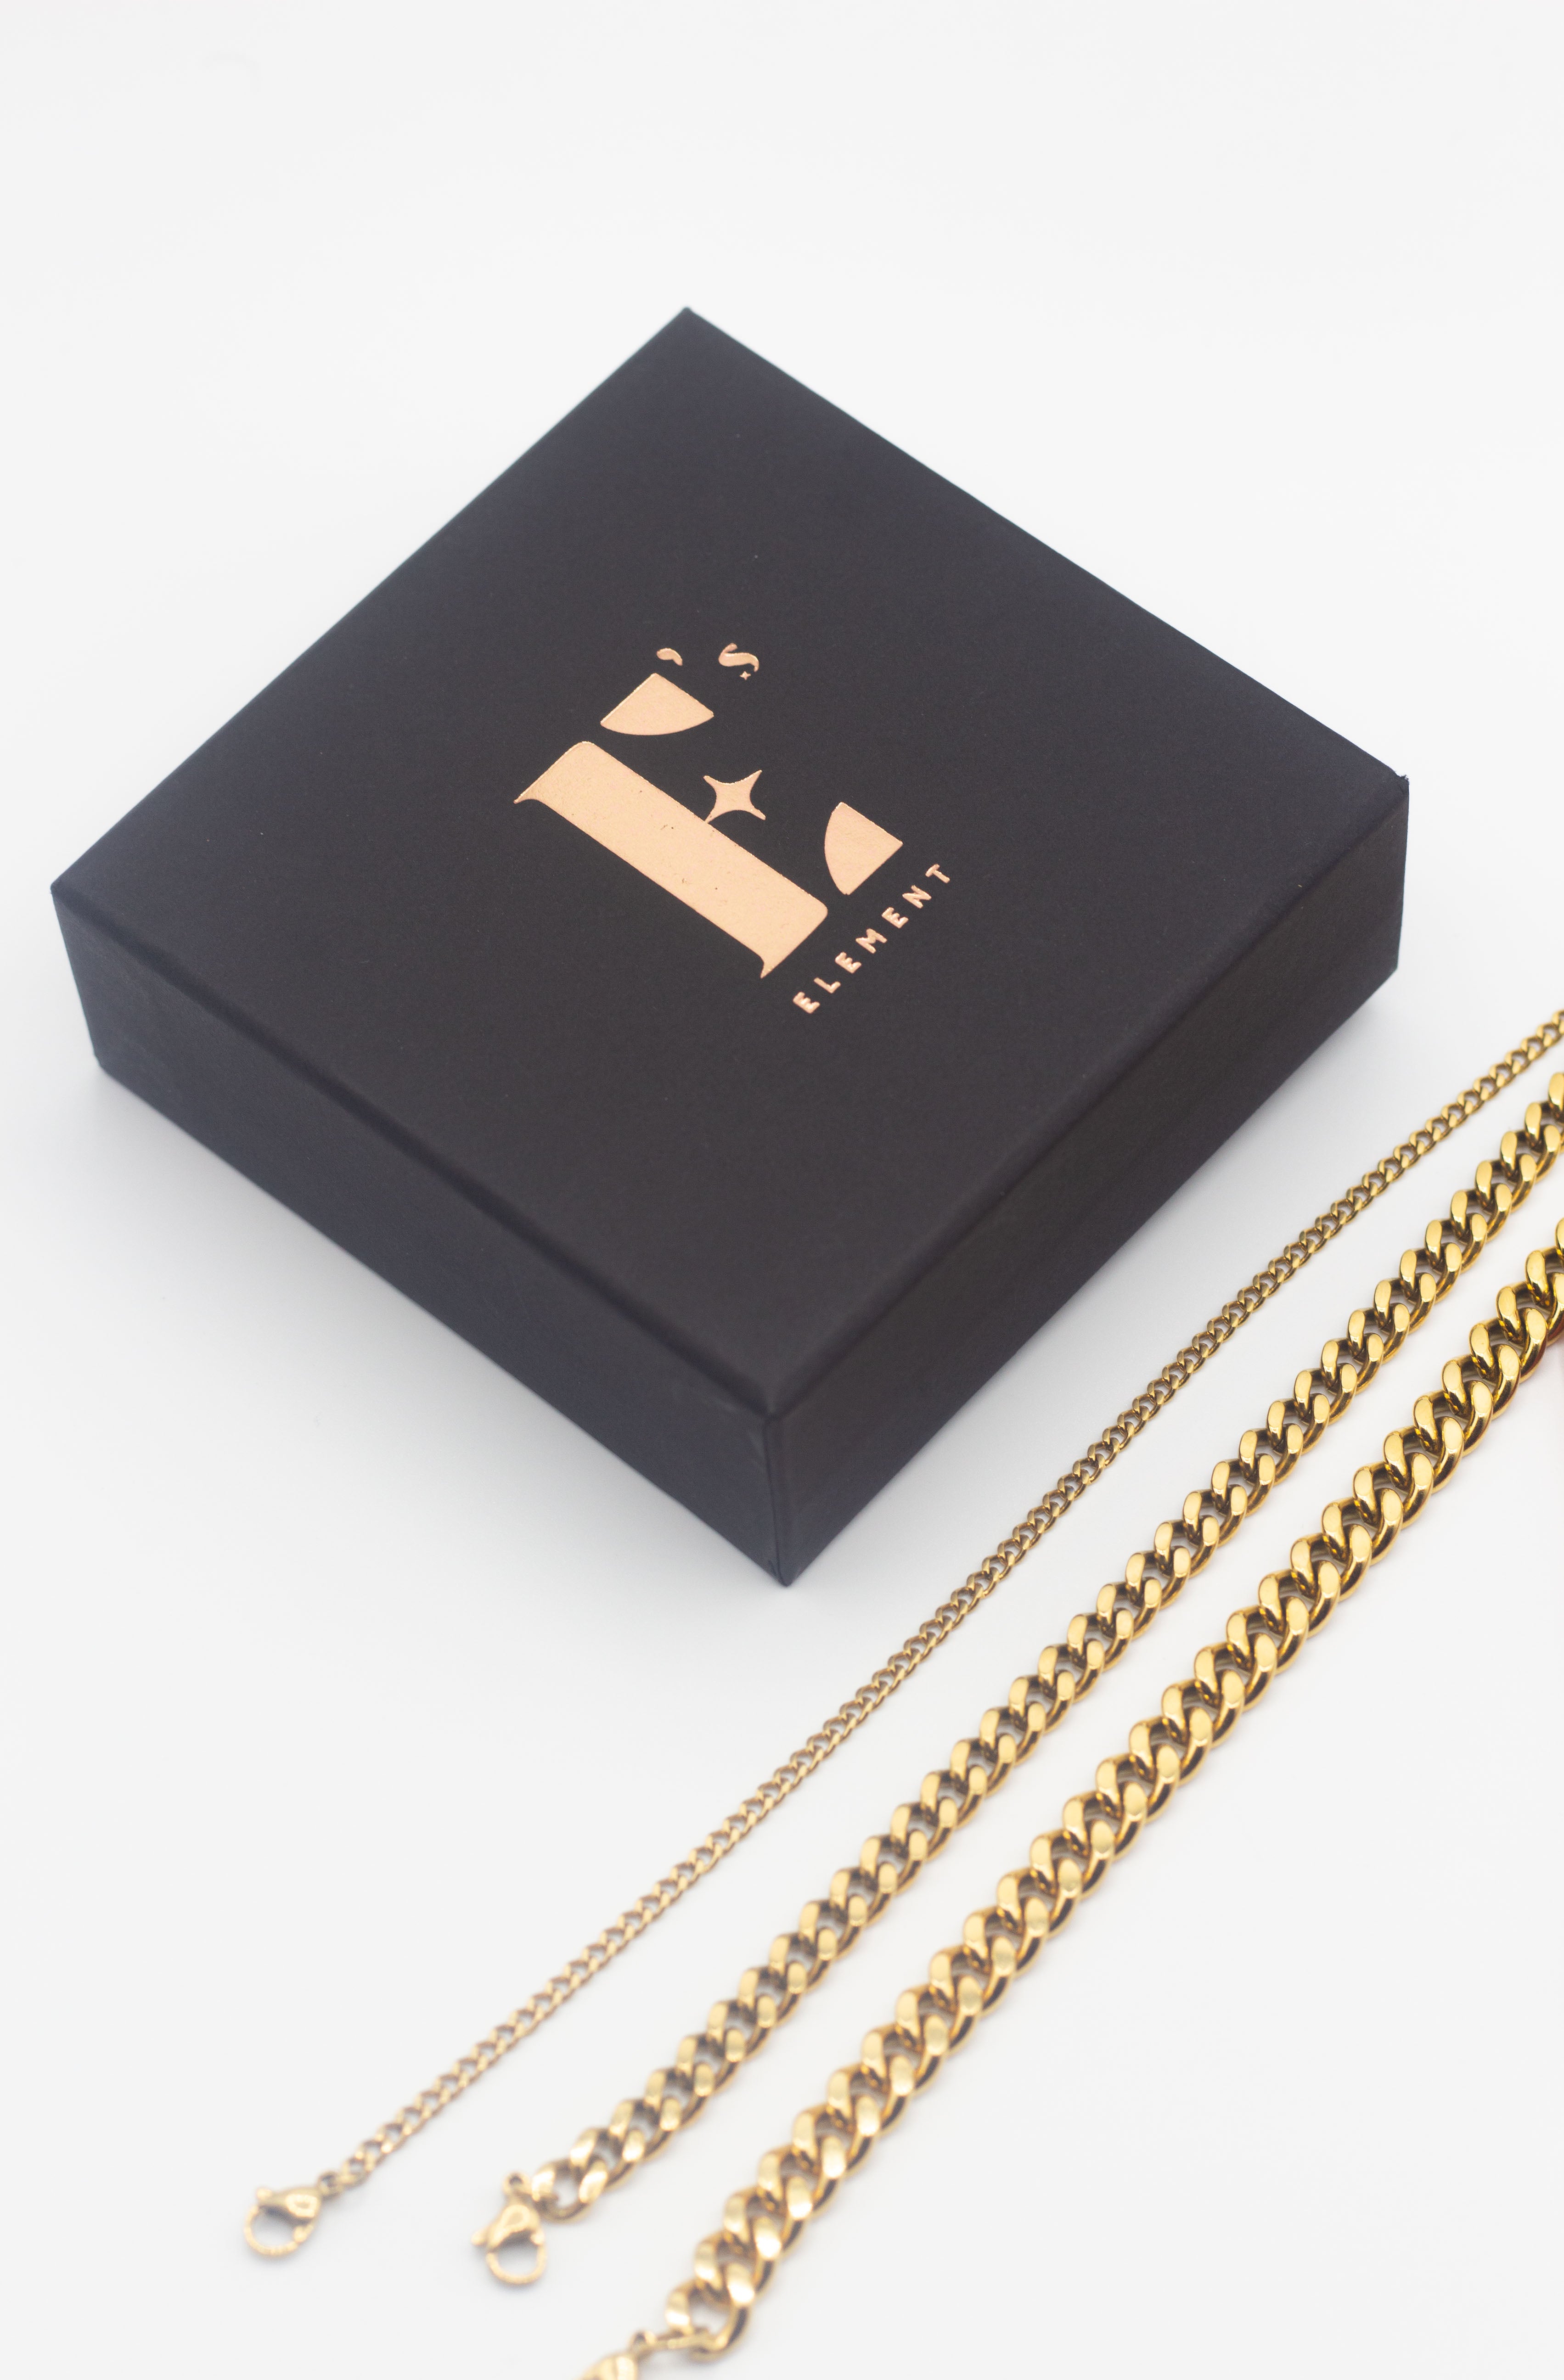 18k gold stainless steel chain anklets in three different sizes. Beside the anklets is the container for the anklets in black with E's Element logo engraved in gold.  Cuban Link Anklet by E's Element.